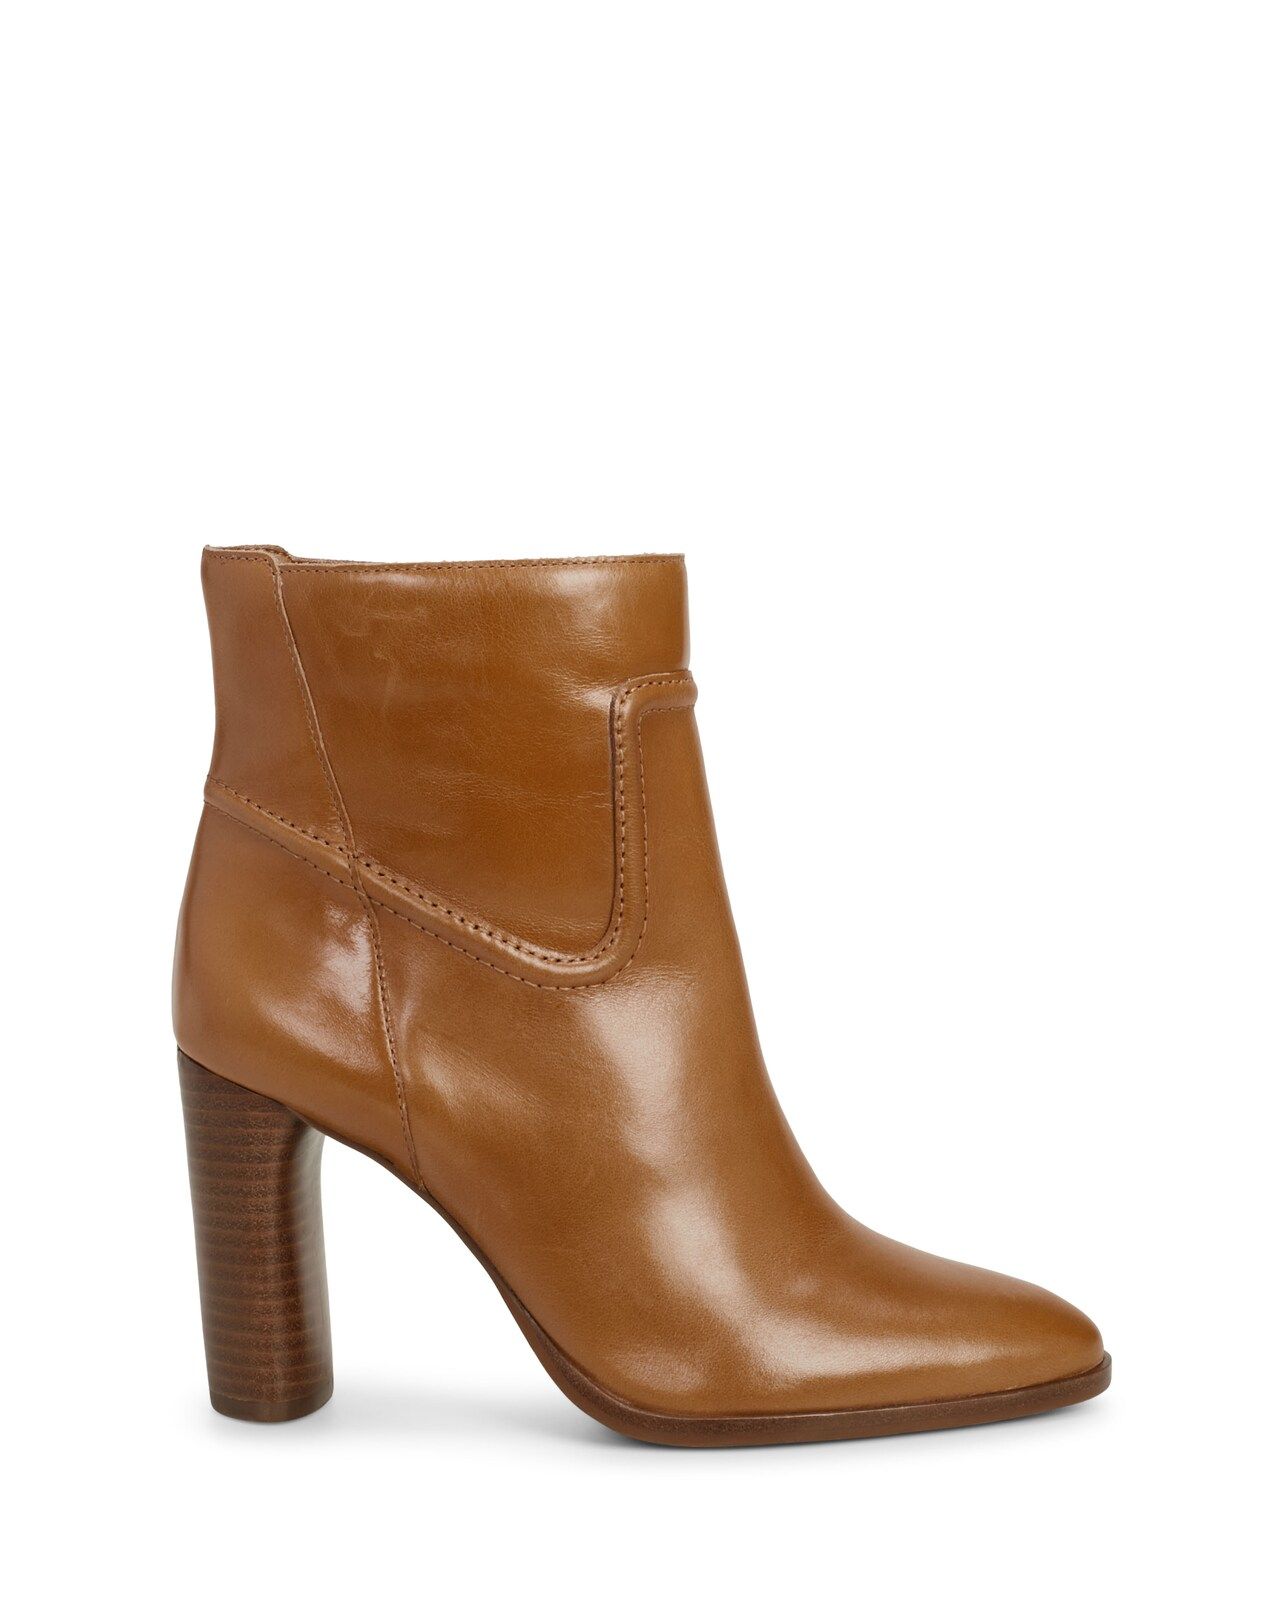 Vince Camuto Epandra Bootie | Vince Camuto